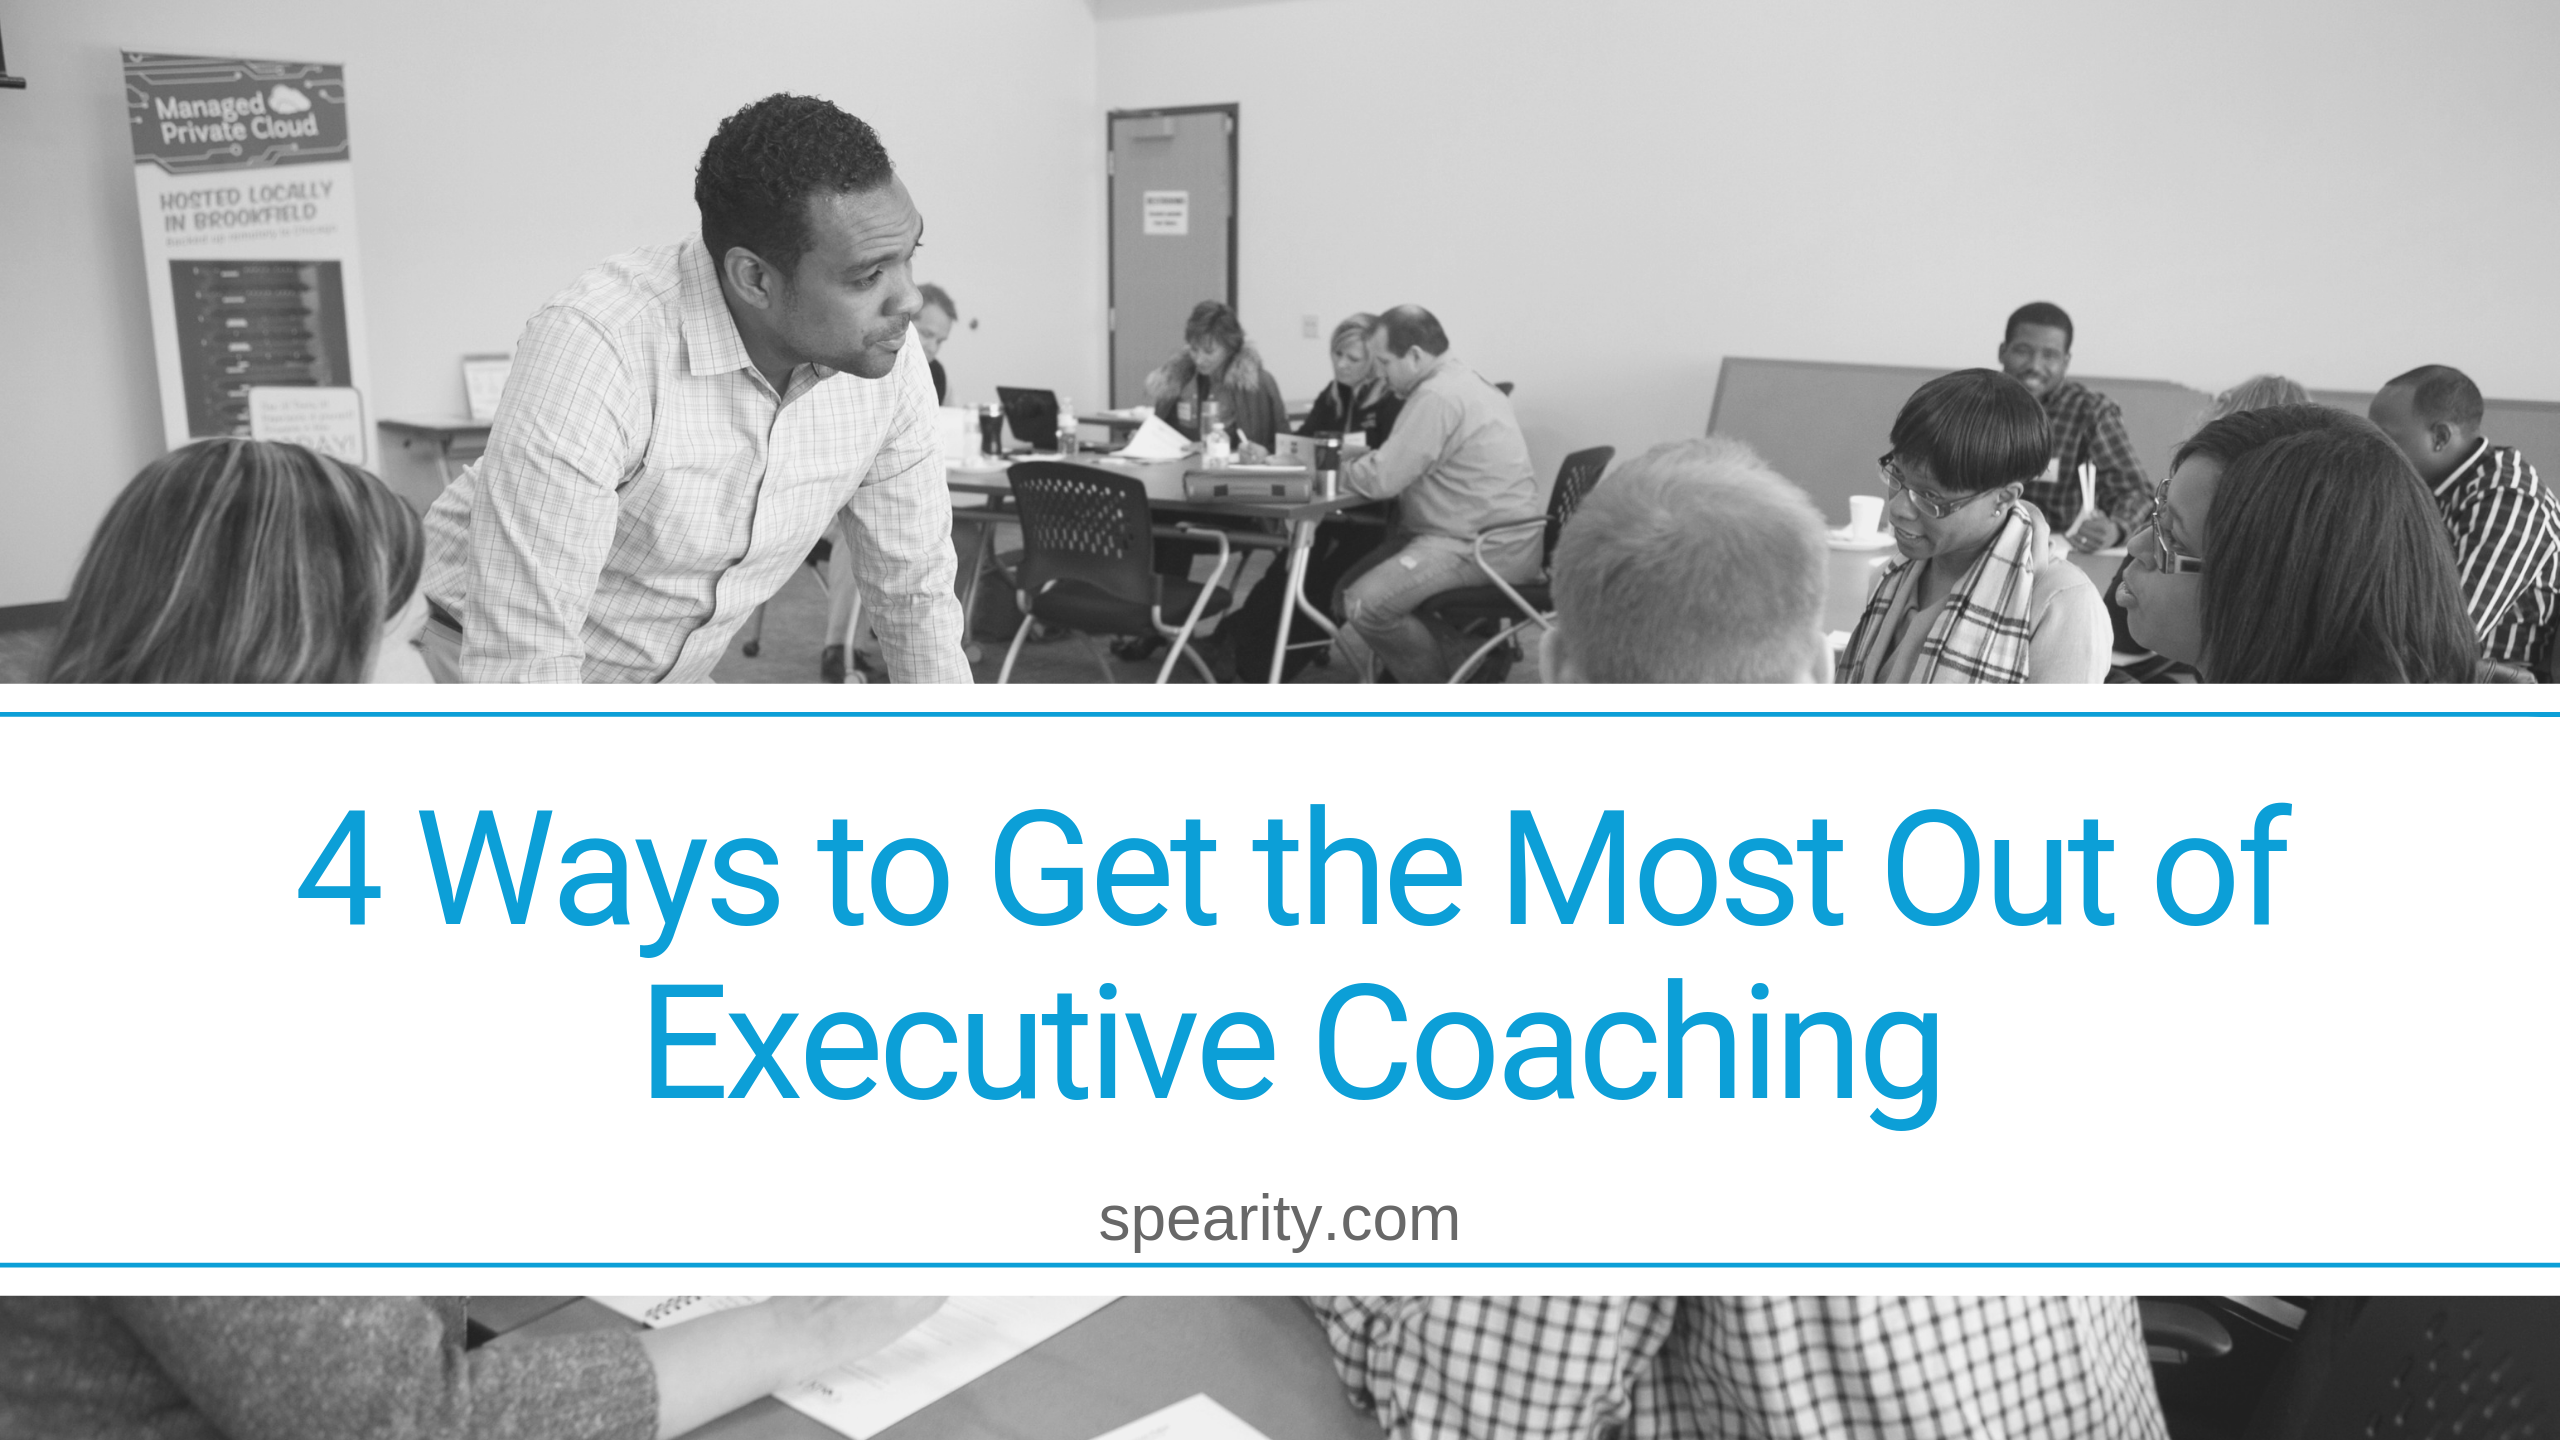 4 Ways to Get the Most Out of Executive Coaching